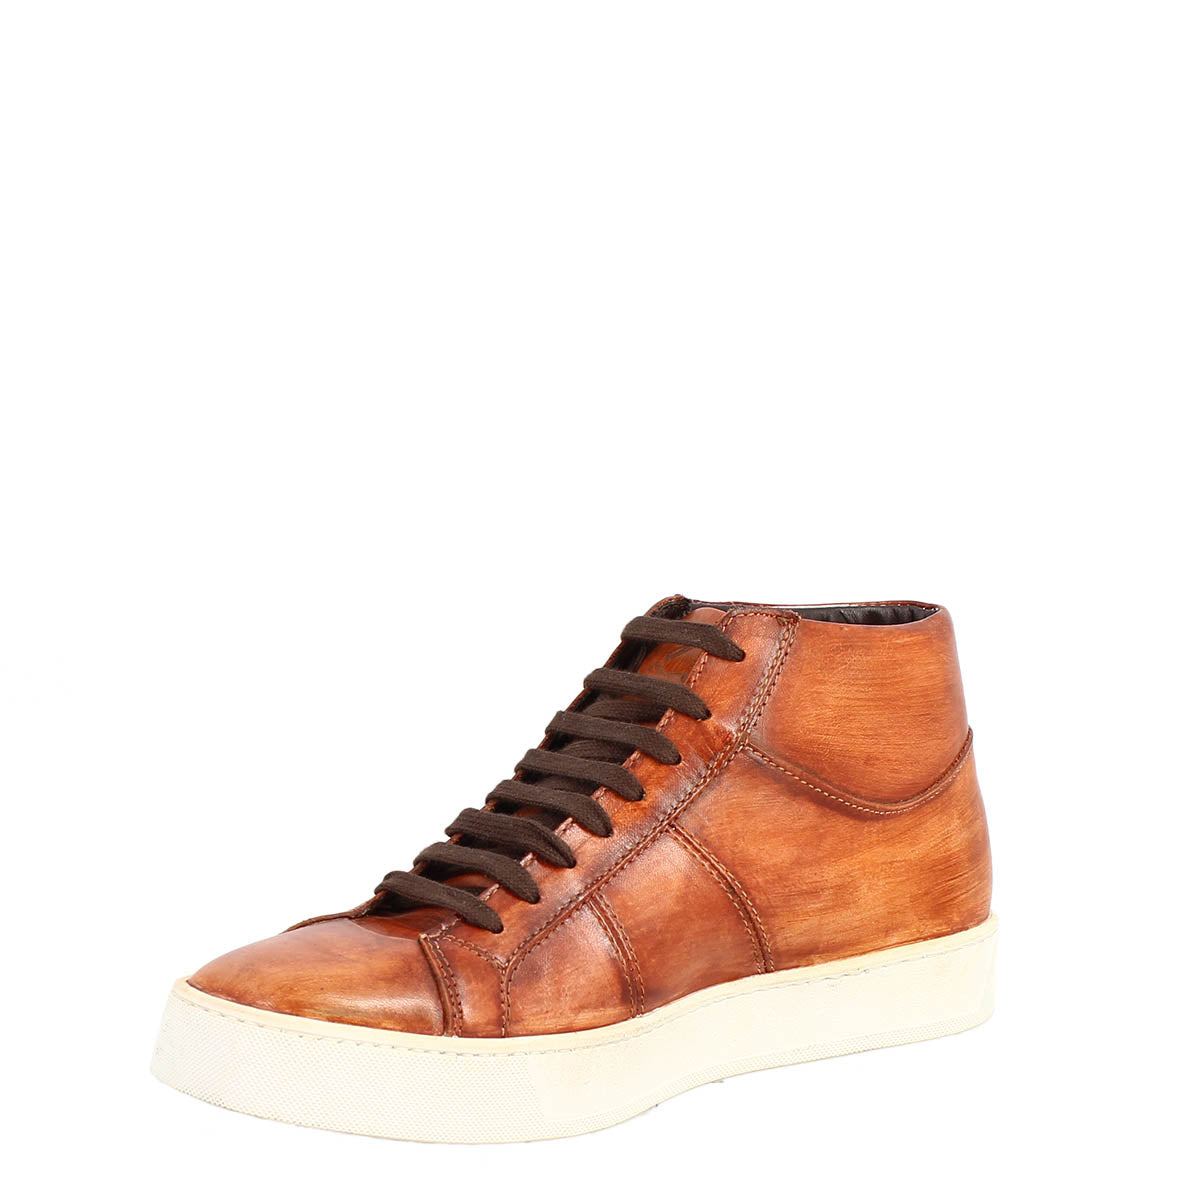 Men's handmade high-top sneakers in tan-colored leather